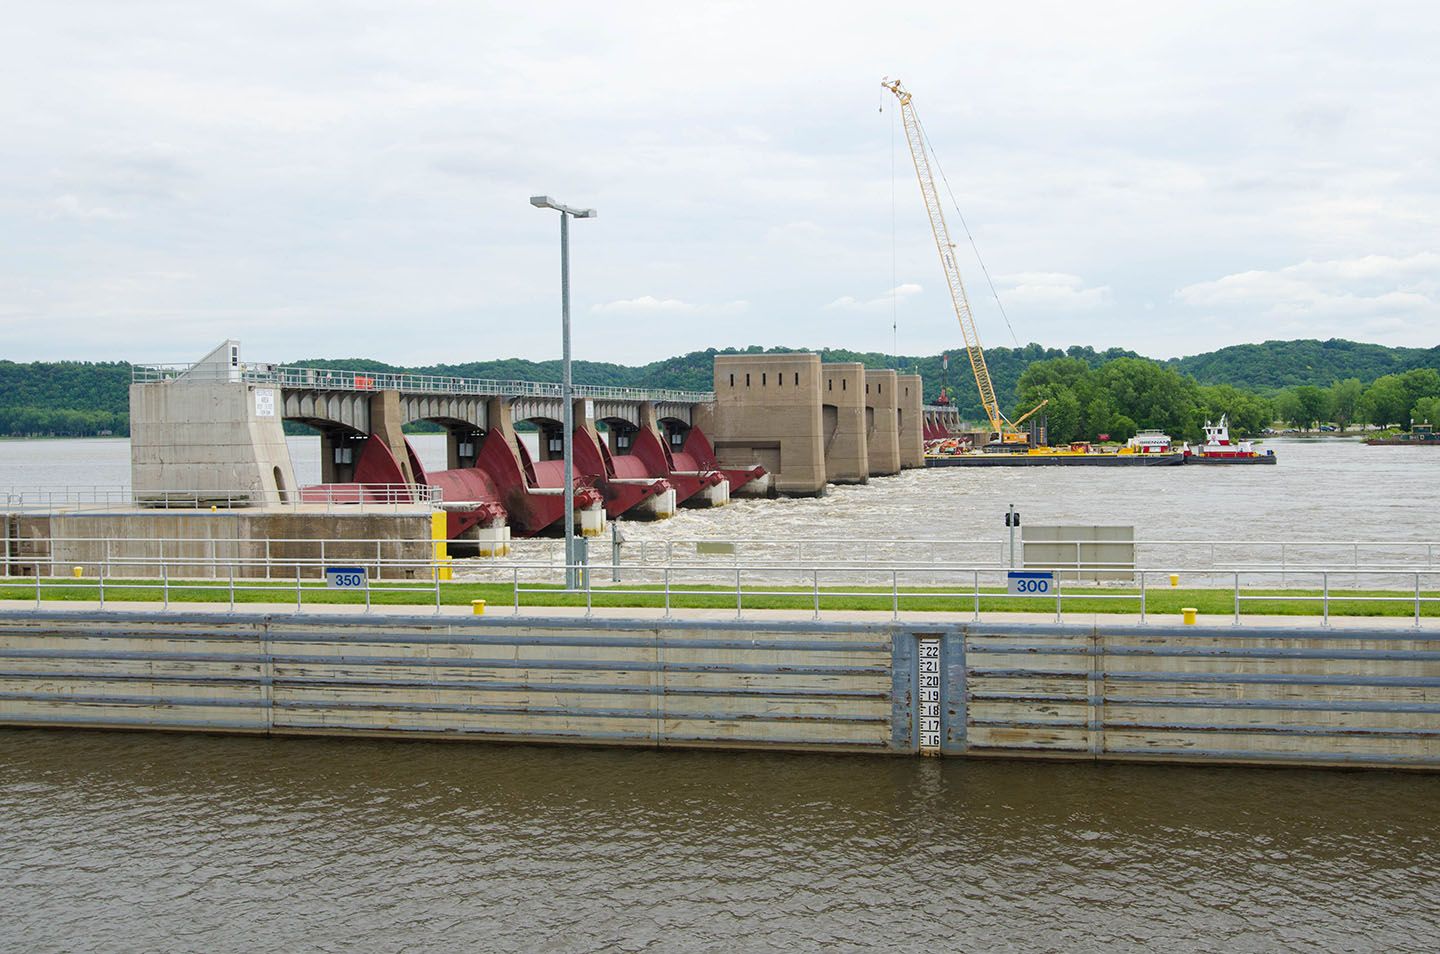 Critical infrastructure on the Mississippi river